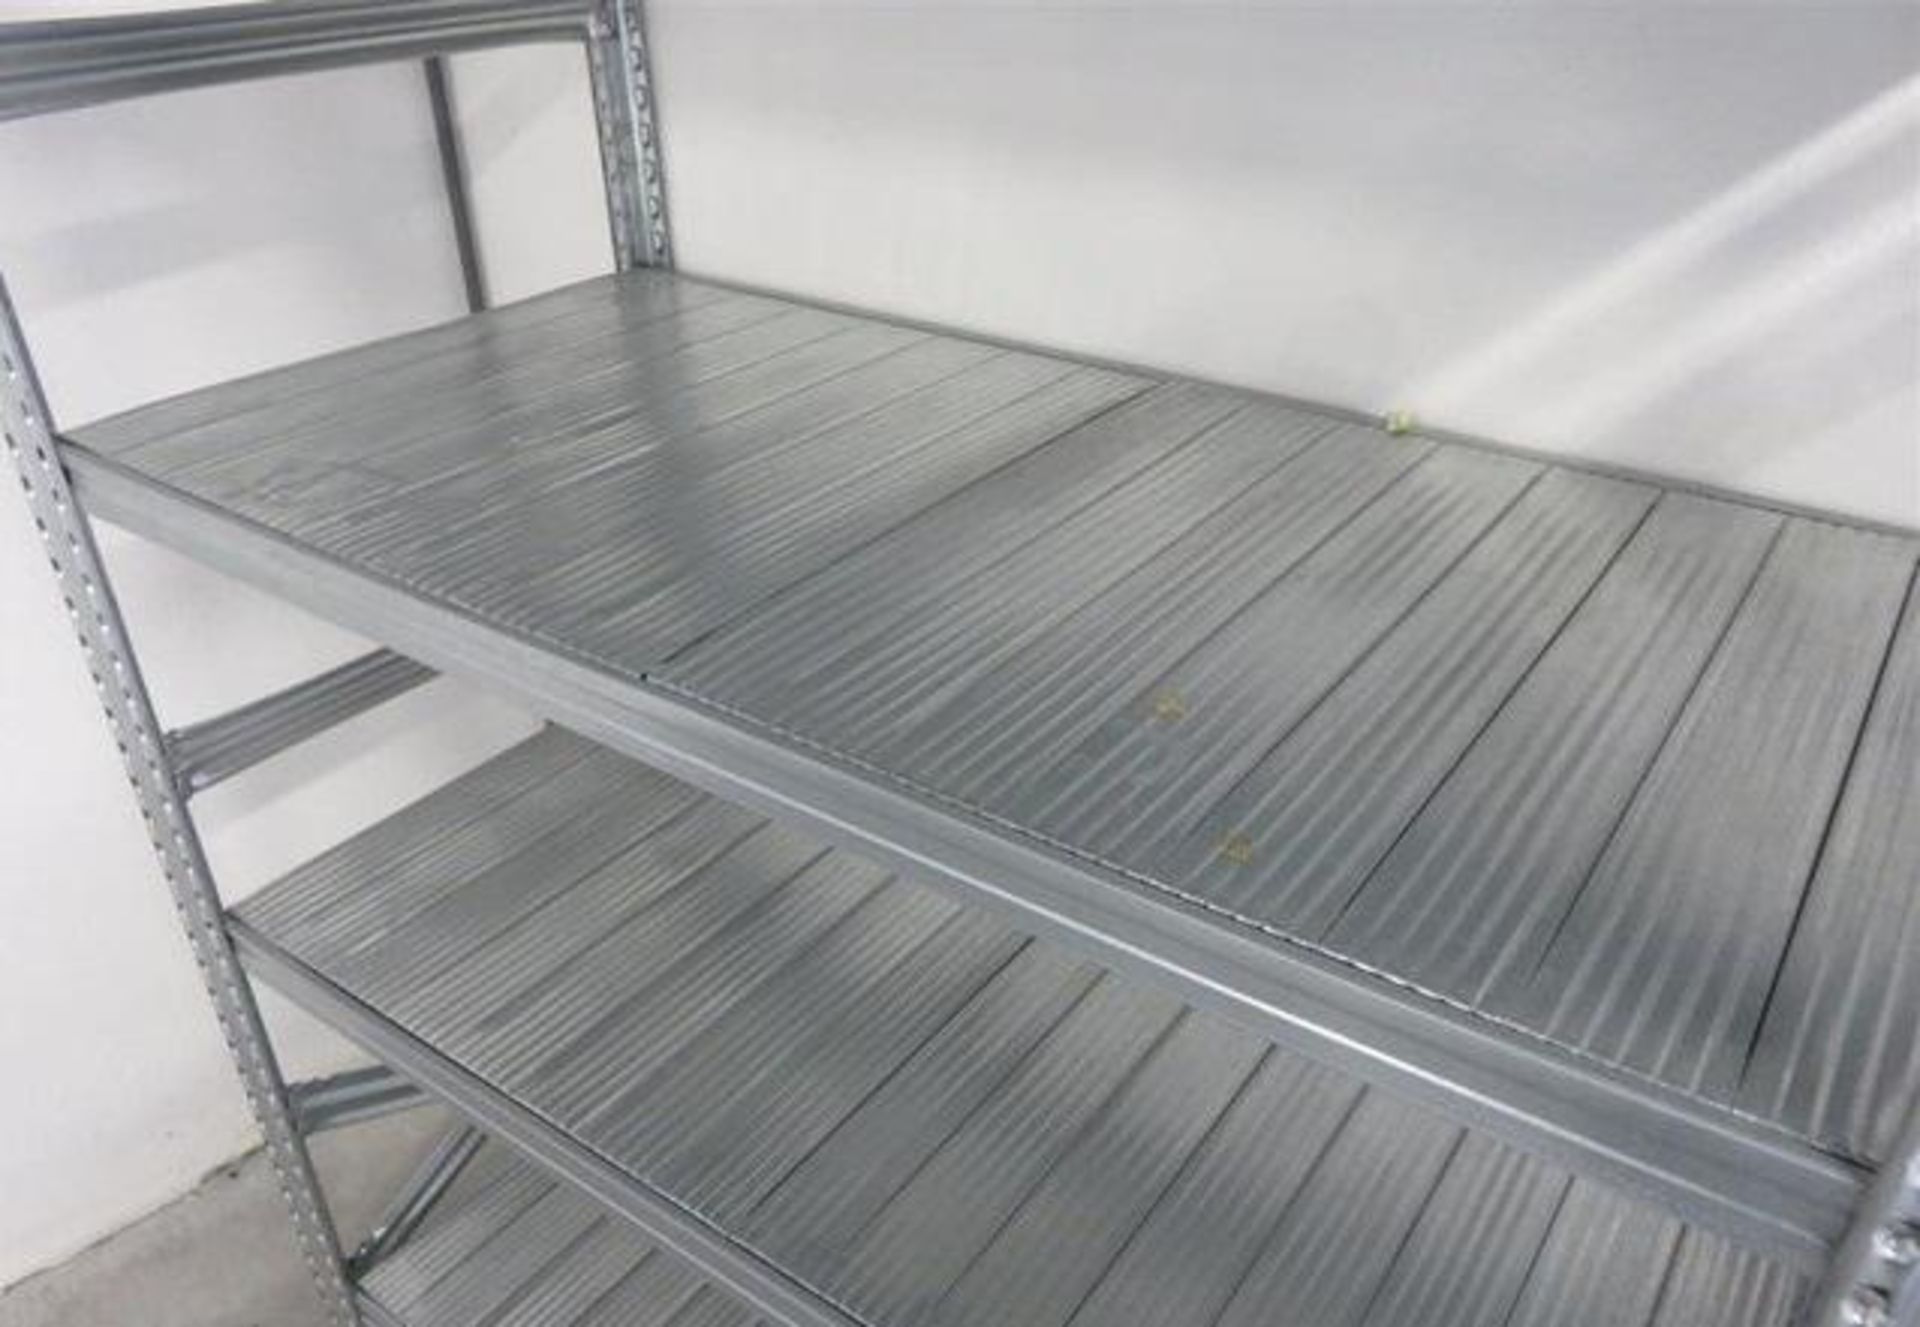 4 x Bays of Metalsistem Steel Modular Storage Shelving - Includes 53 Pieces - Recently Removed - Image 9 of 17